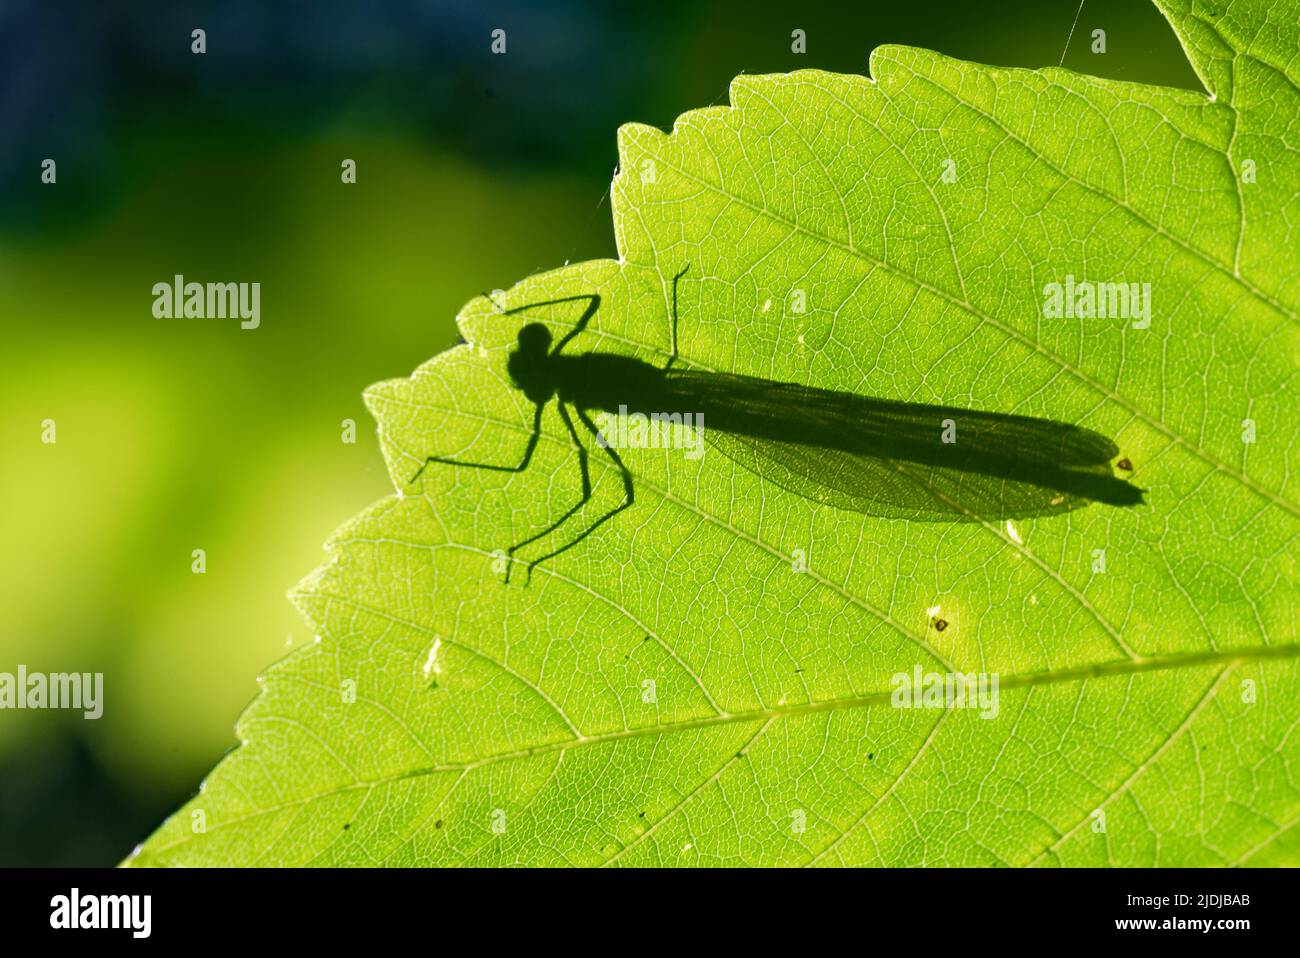 Azure damselfly (Coenagrion puella) is a species of damselfly found in most of Europe. It is notable for its distinctive black and blue colouring. Stock Photo